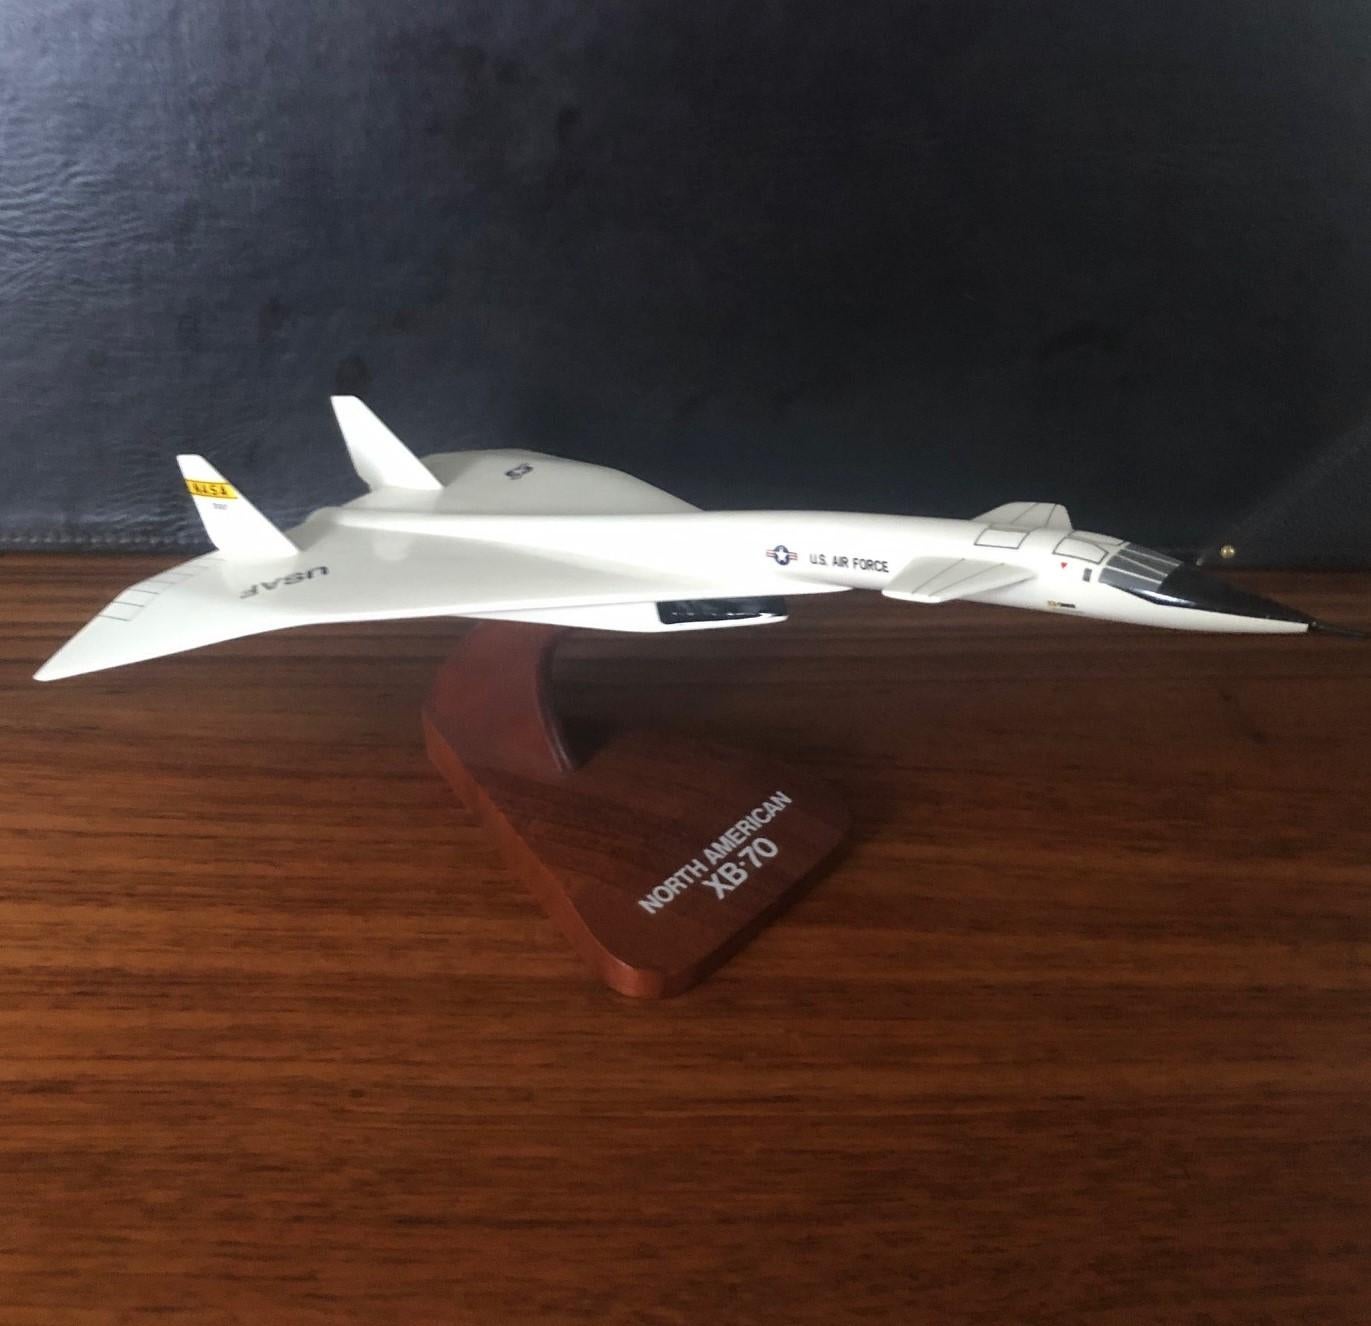 U.S. Air Force NASA XB-70 Valkyrie Airplane / Bomber Contractor Desk Model 1